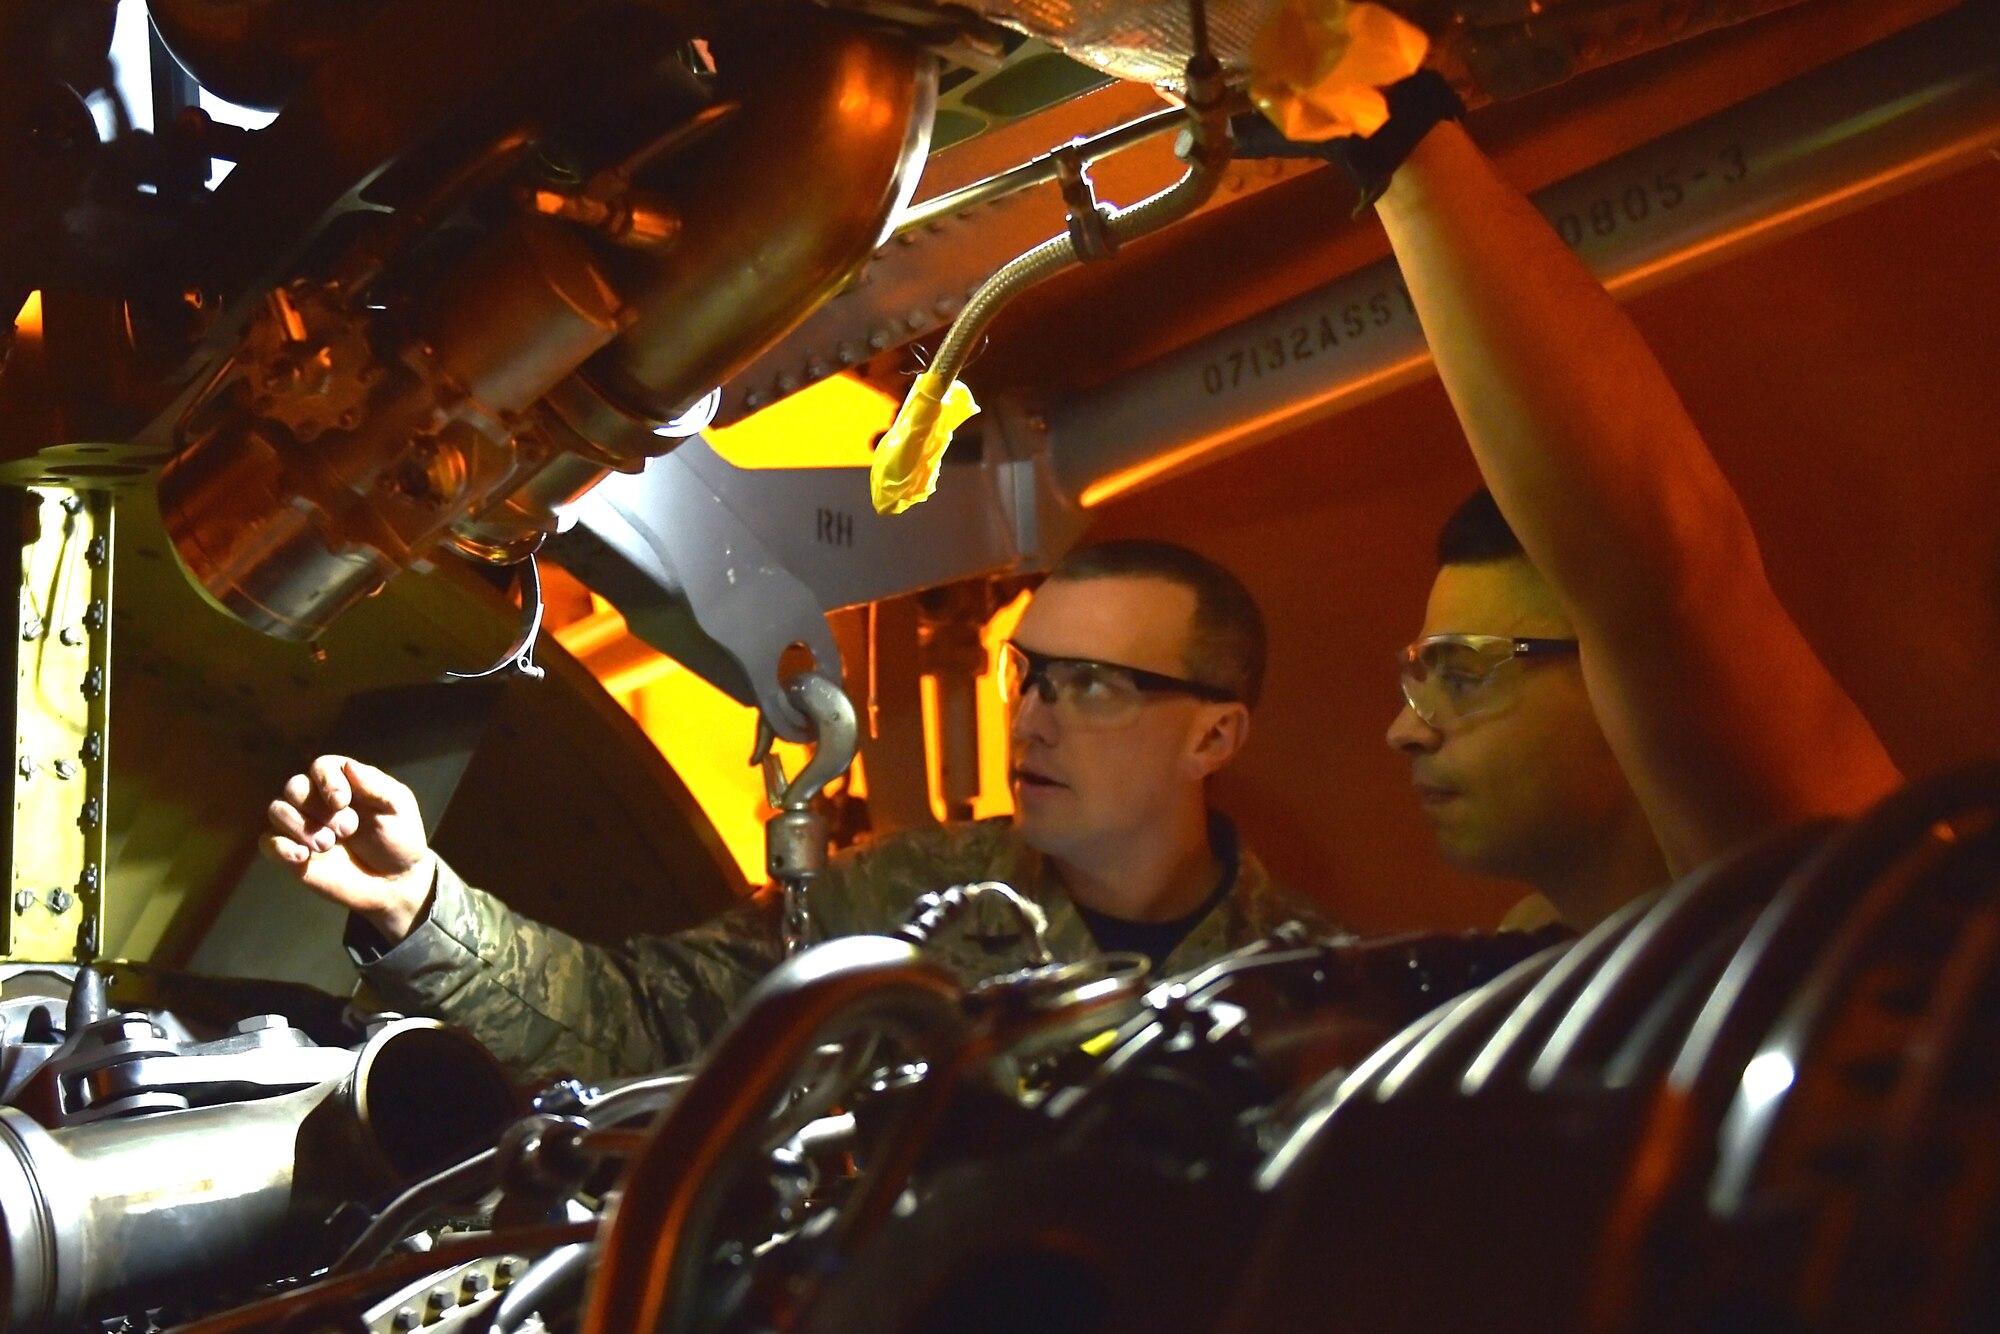 Master Sgt. Nathan Foxworth, 434th Maintenance Squadron propulsion flight chief, instructs Senior Airman Jesse Medrano 434th MXS propulsion specialist, as they prepare to install an engine in the wing of a KC-135R Stratotanker at Grissom Air Reserve Base, Indiana, Jan. 11, 2020. The 6,000 pound engine replaced another engine that showed signs of over temping and decreased performance. (U.S. Air Force photo/Tech. Sgt. Jami Lancette)